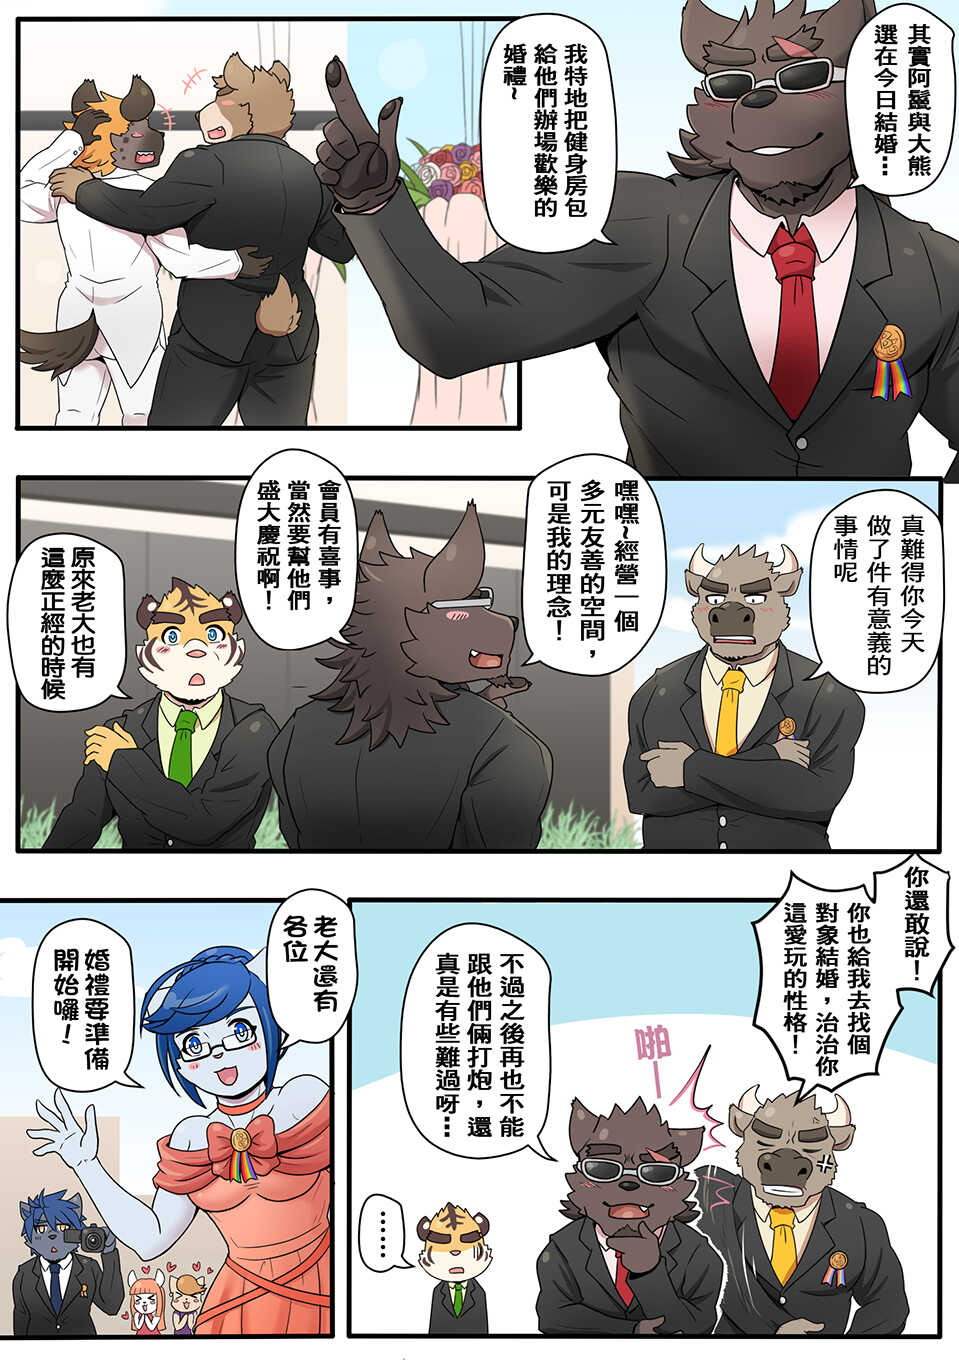 [Ripple Moon] Gym Pals (健身小哥) (Ongoing) [Chinese] [连载中] - Page 24